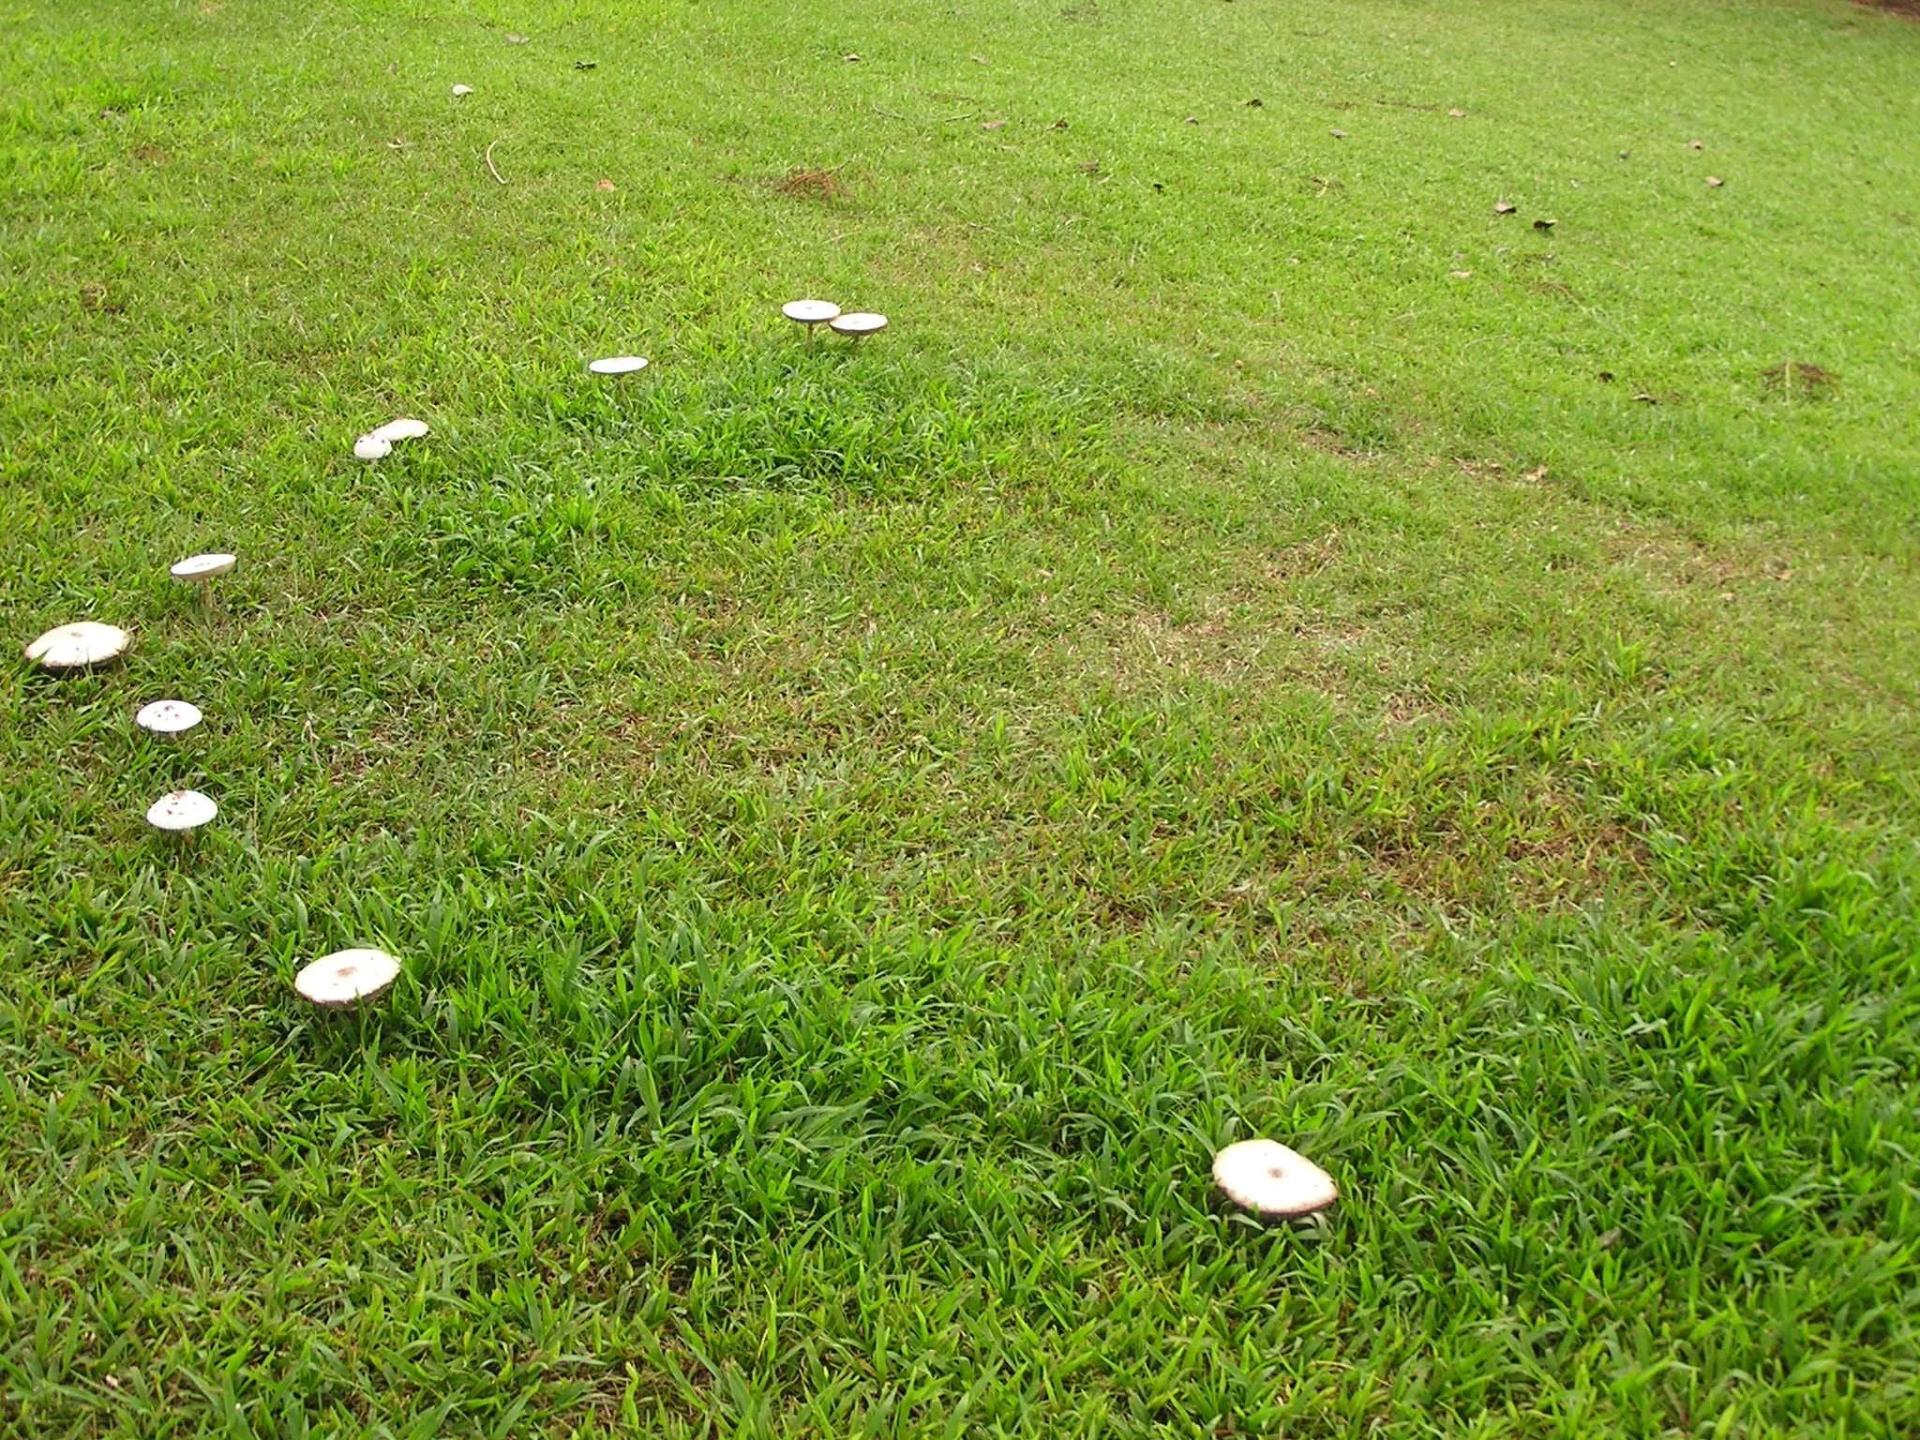 A Fairy Ring on the Lawn